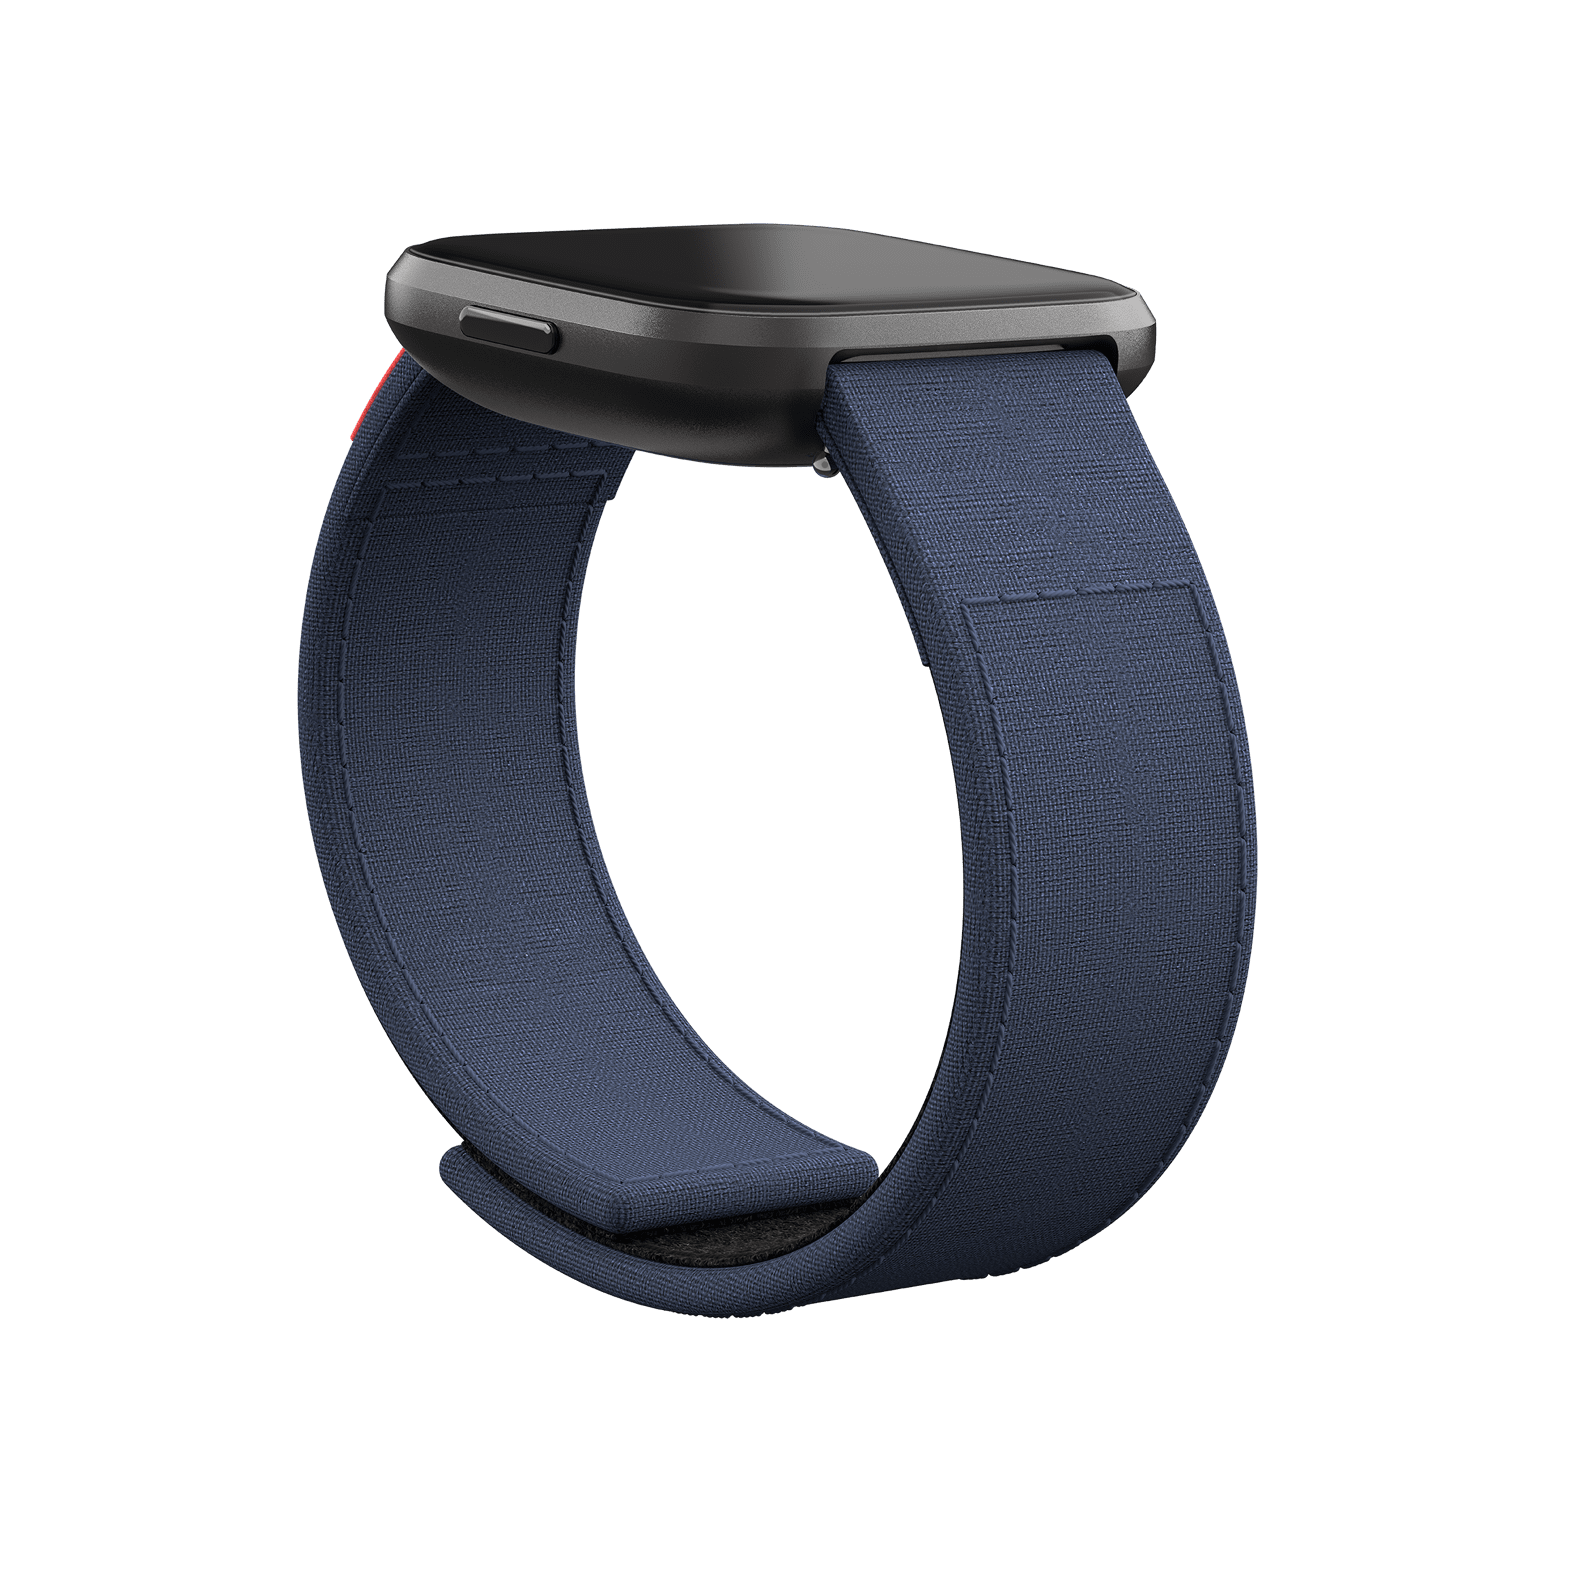 fitbit versa woven band review